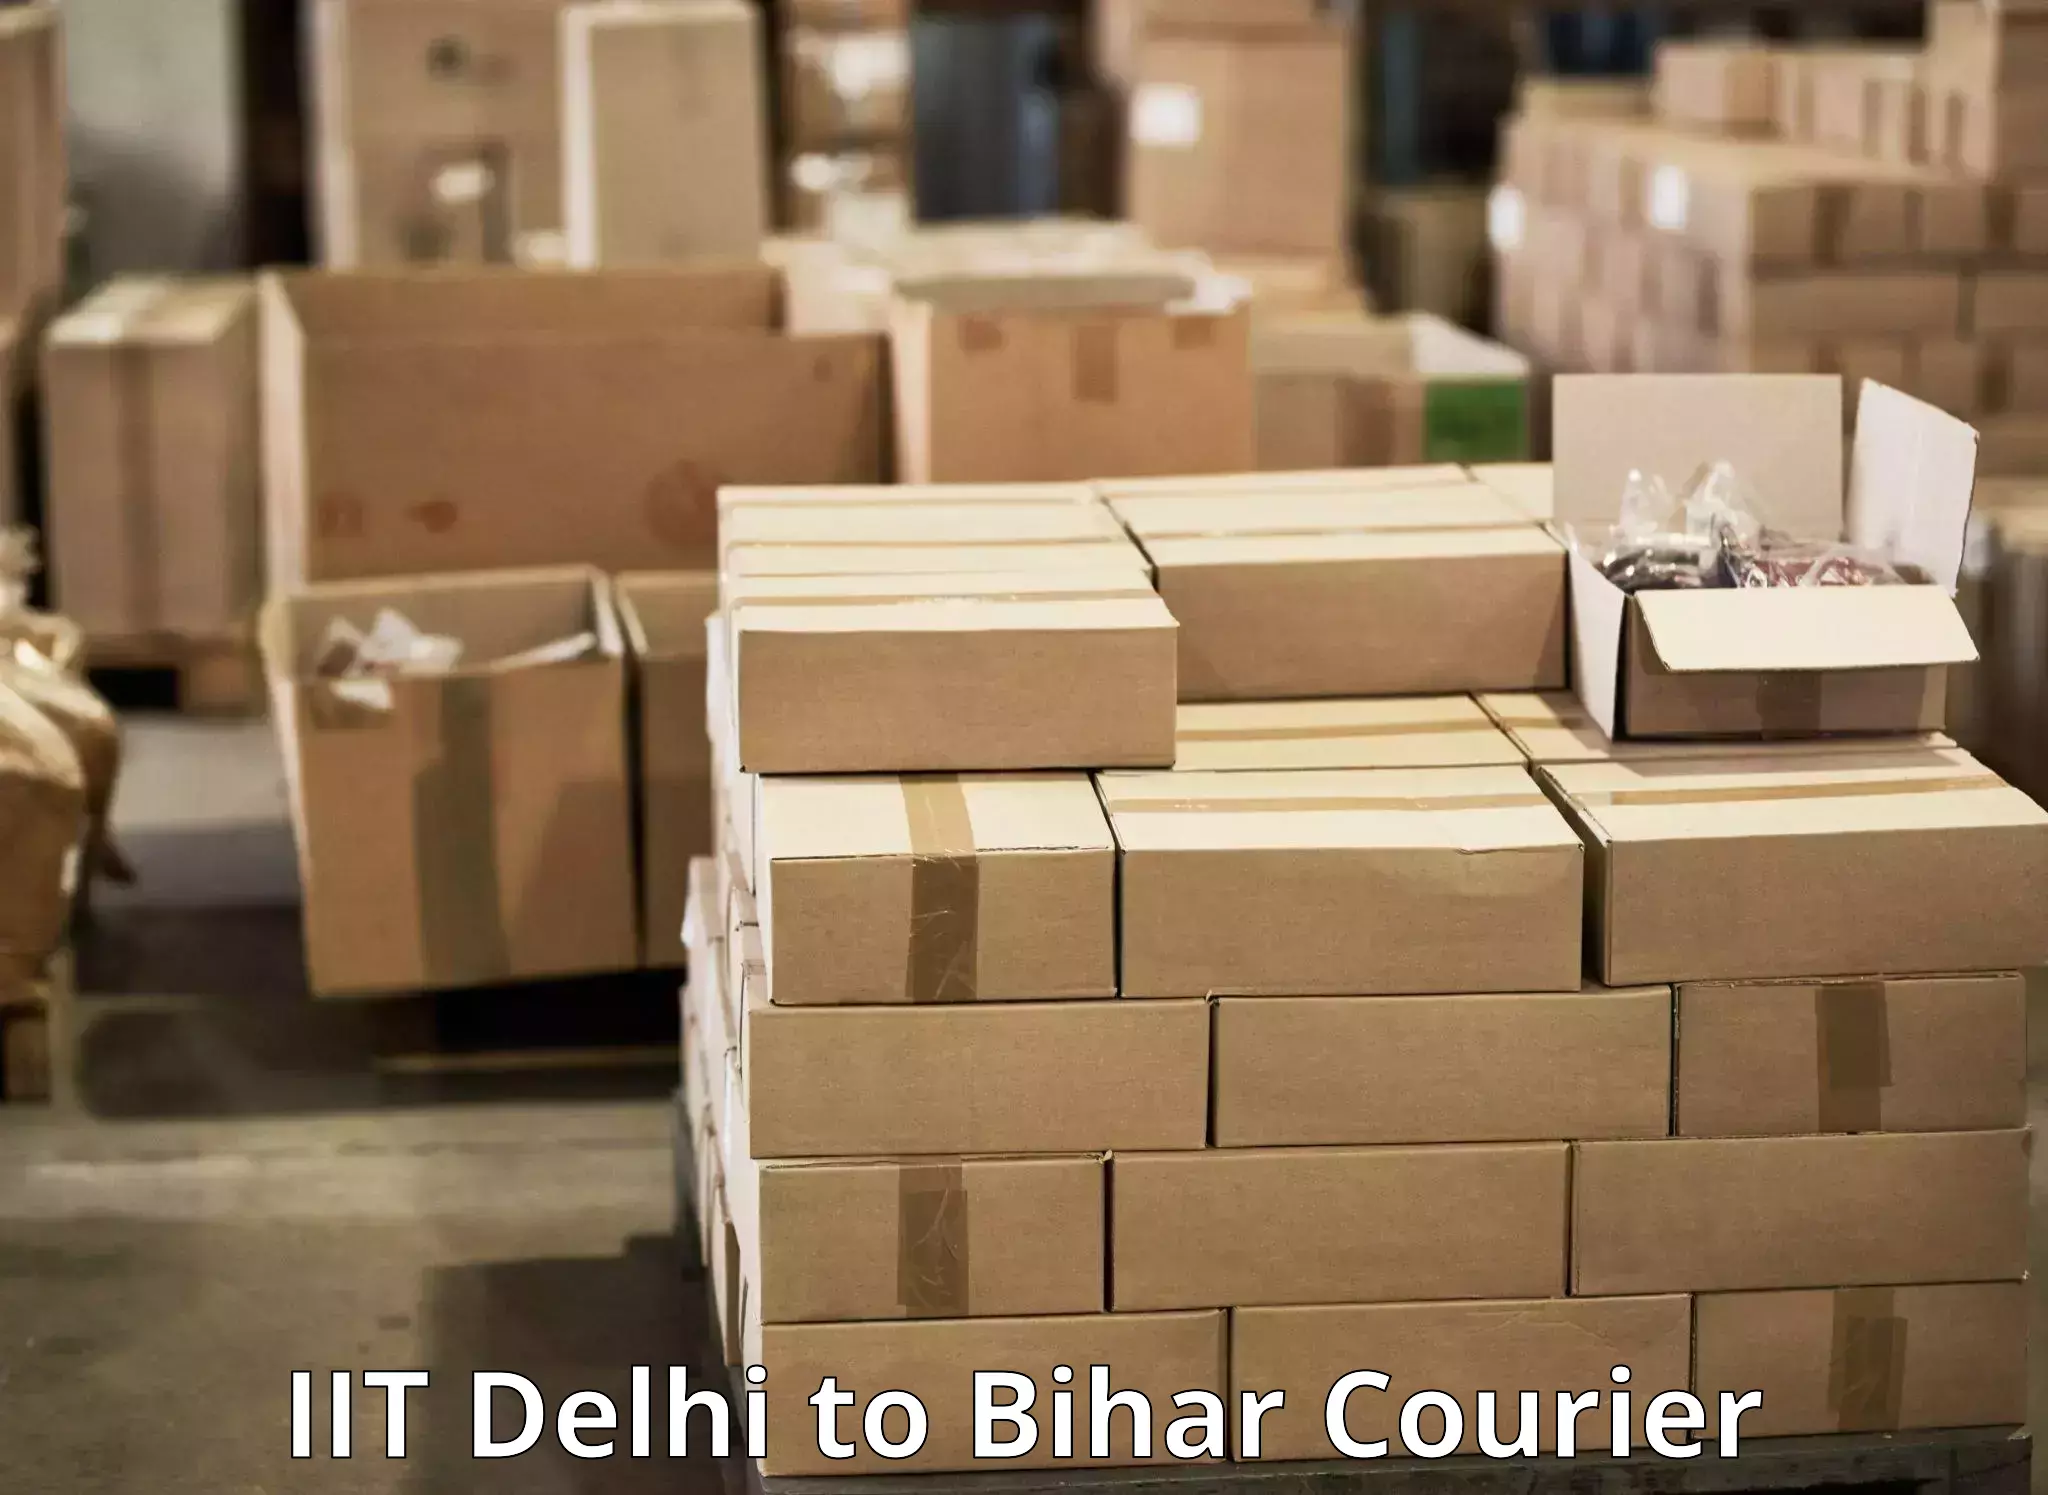 Global shipping networks IIT Delhi to Gauripur